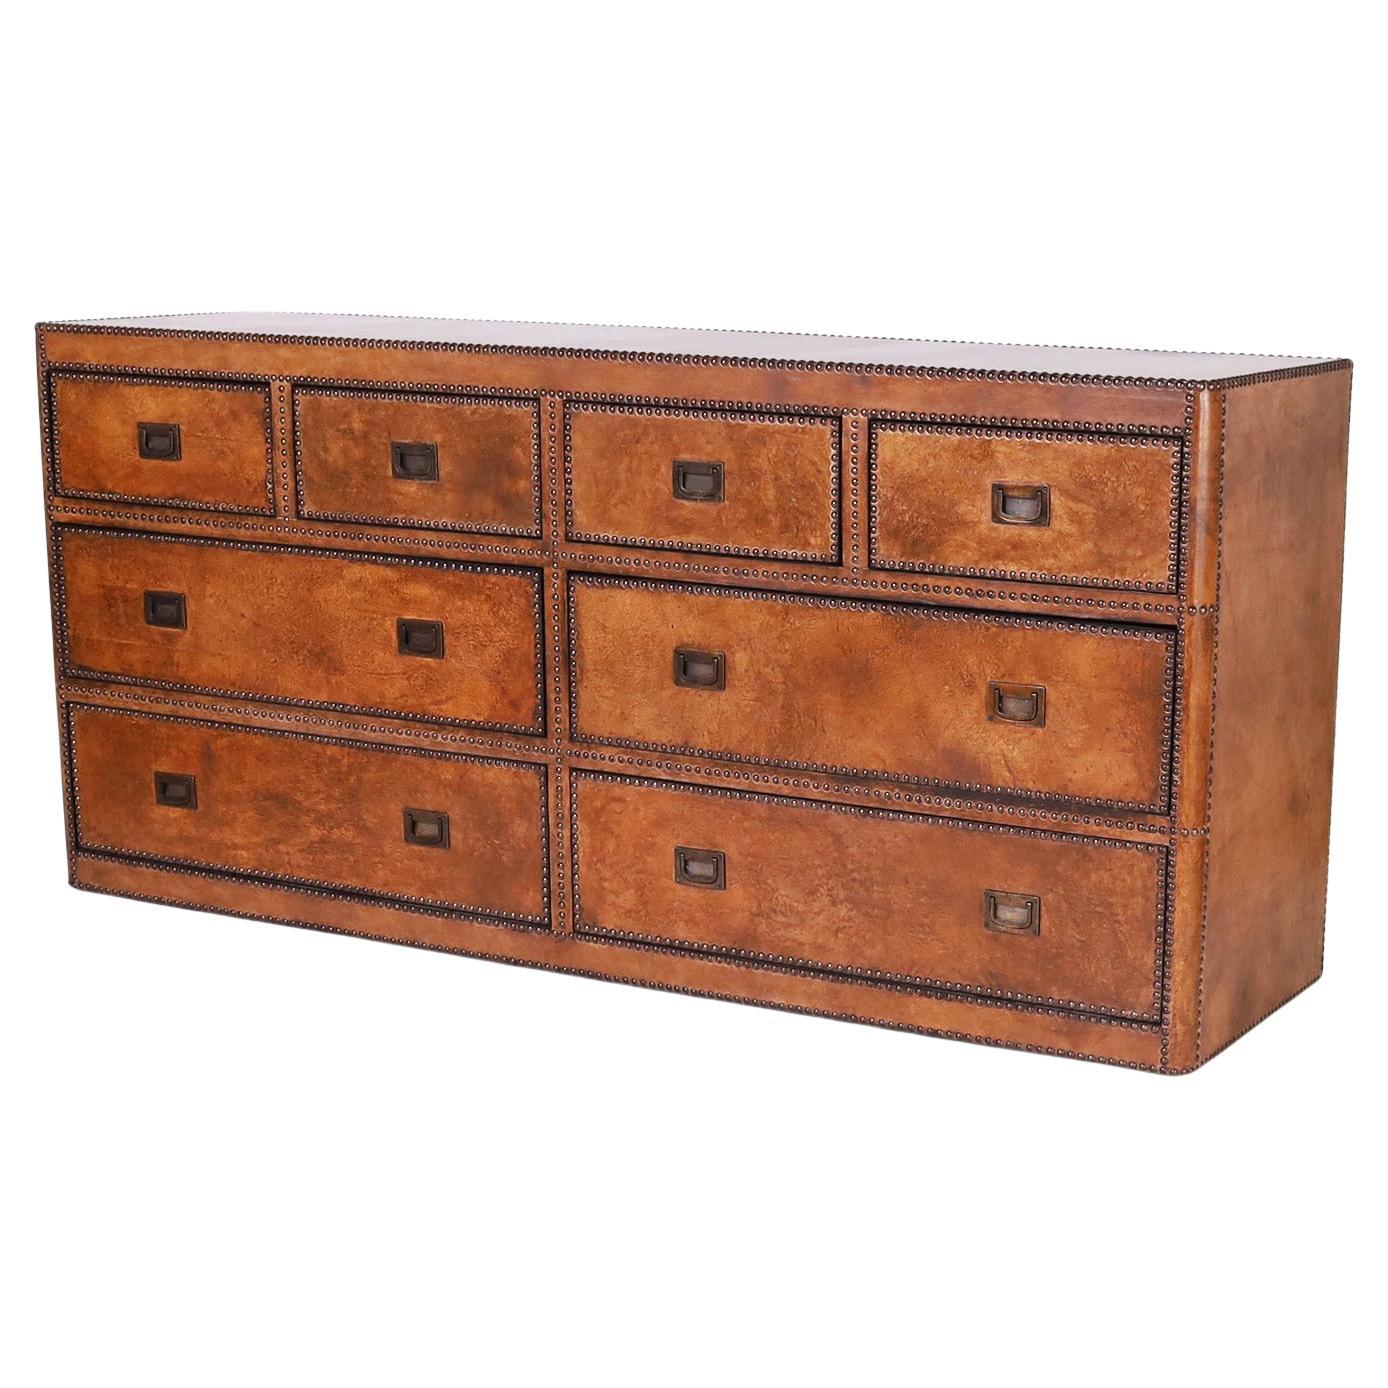 Leather Clad Campaign Style Chest of Drawers or Dresser